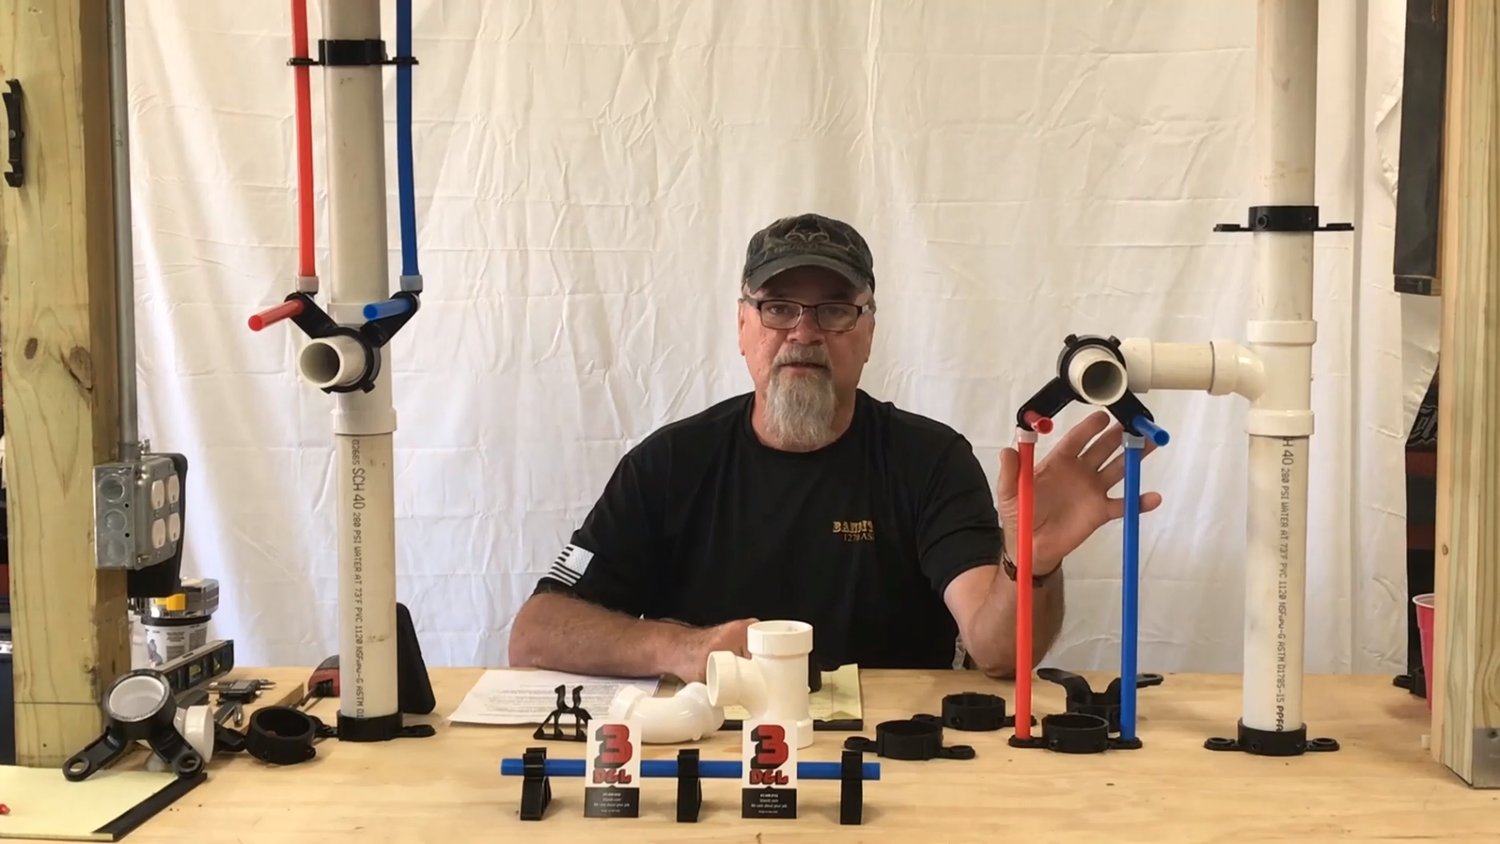 3D&L owner Doug Harris demonstrates the company’s products that hold pipes in place.